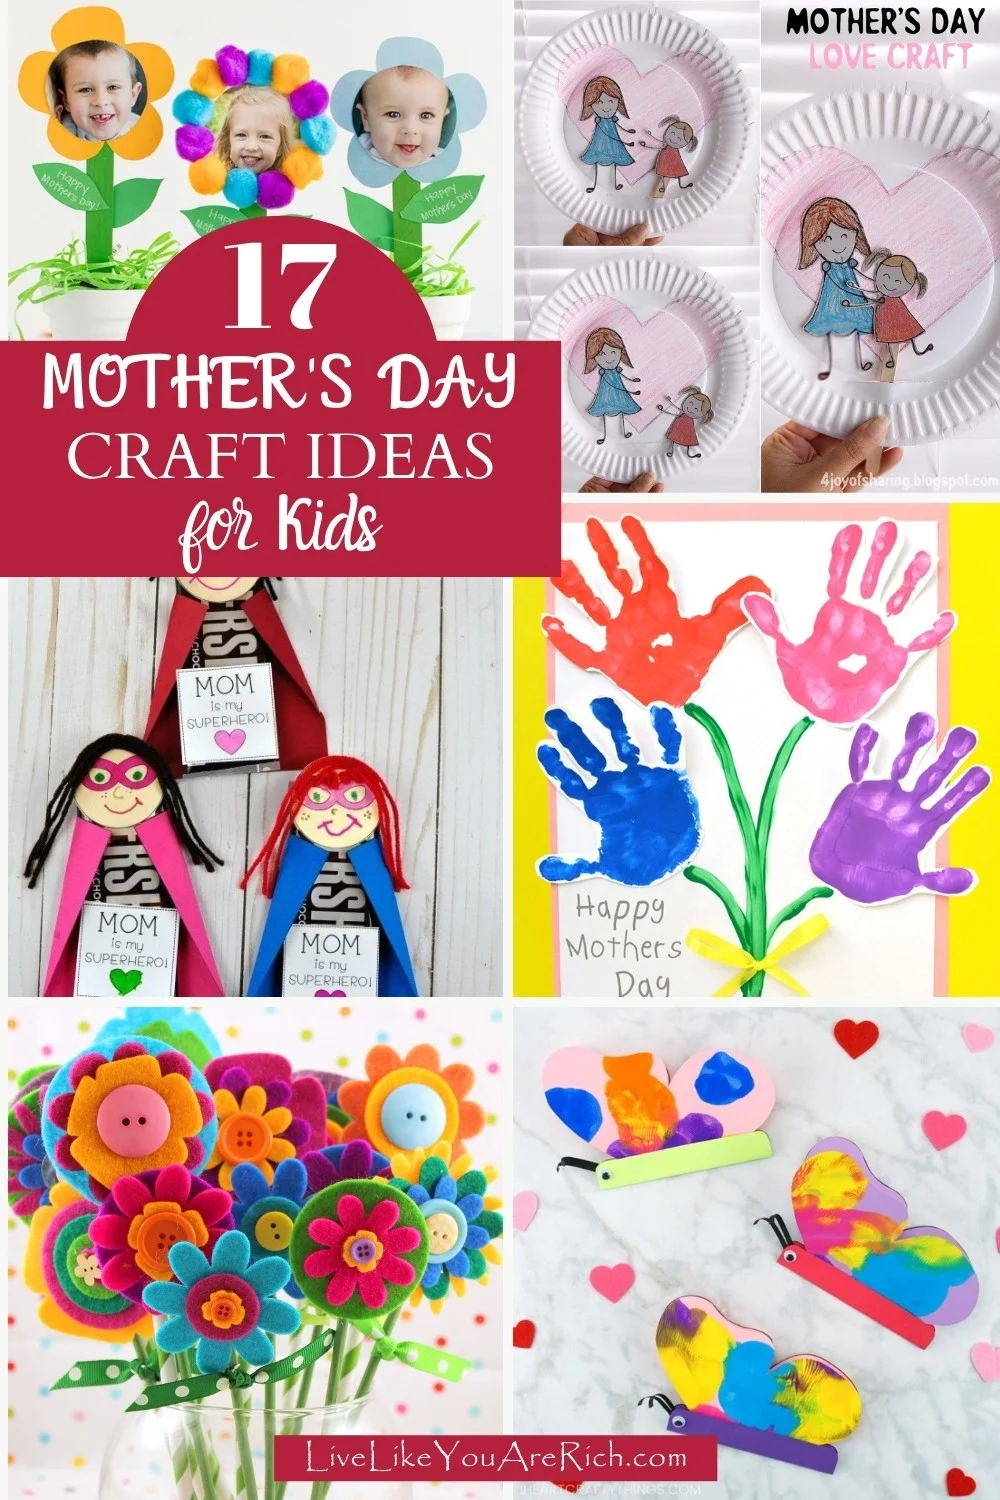 17 Mother's Day Craft Ideas for Kids